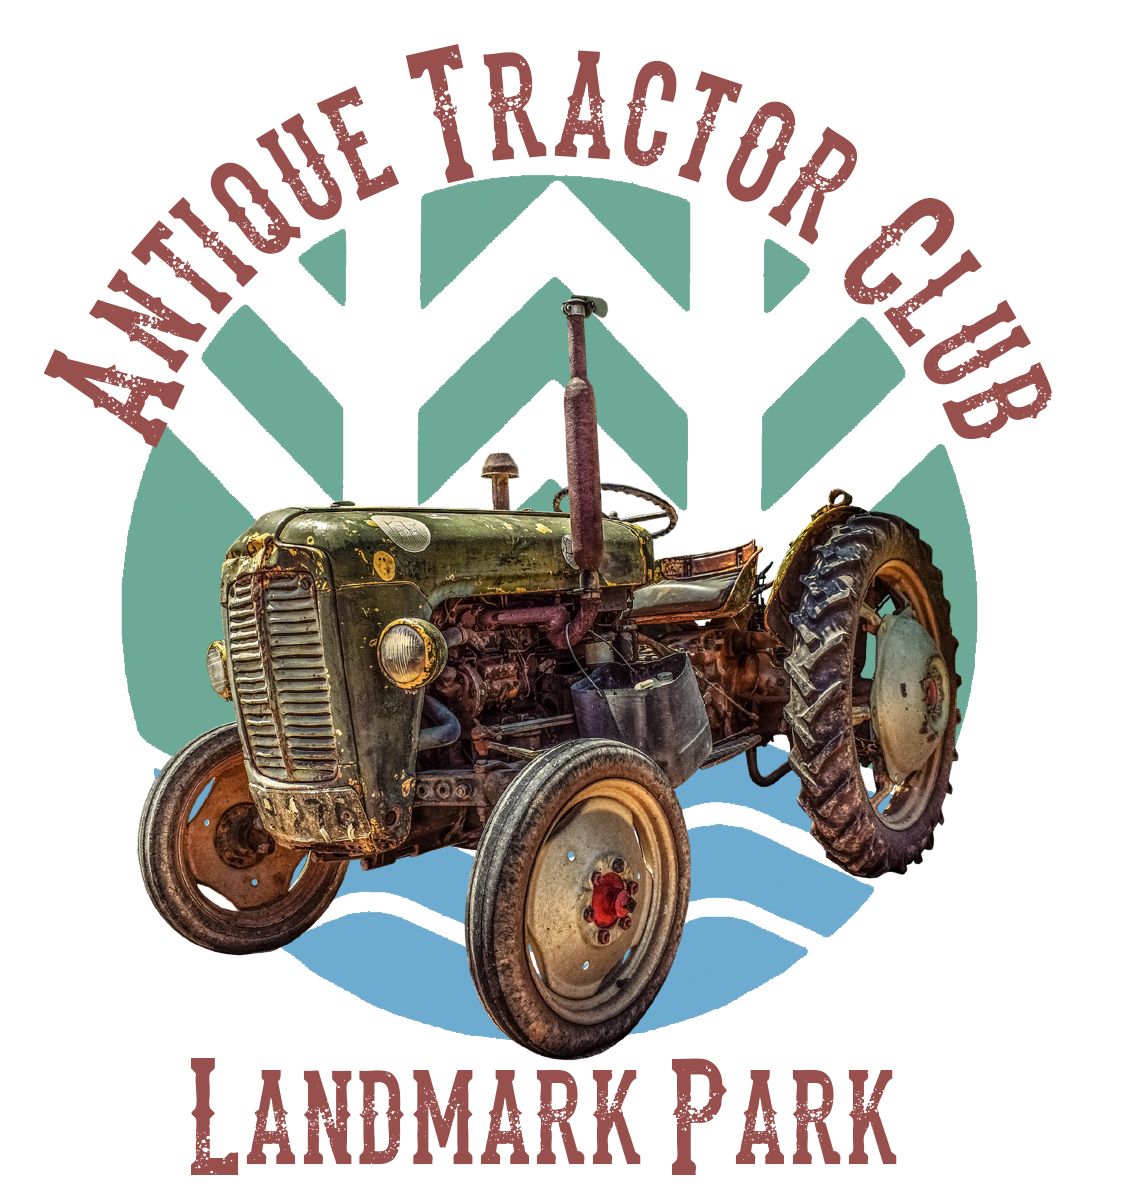 Antique Tractor Club Meeting